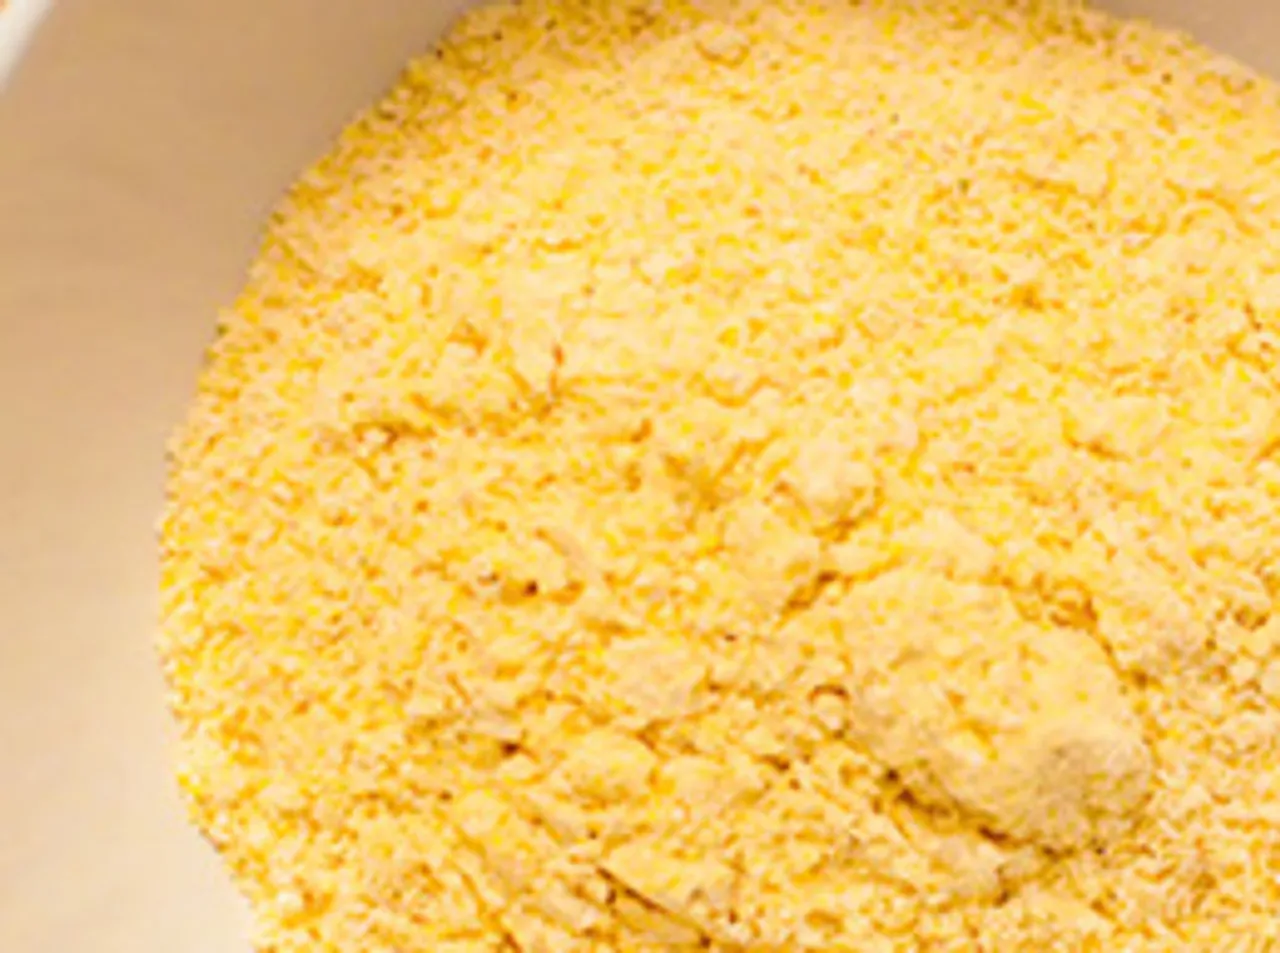 Make a meal with corn meal